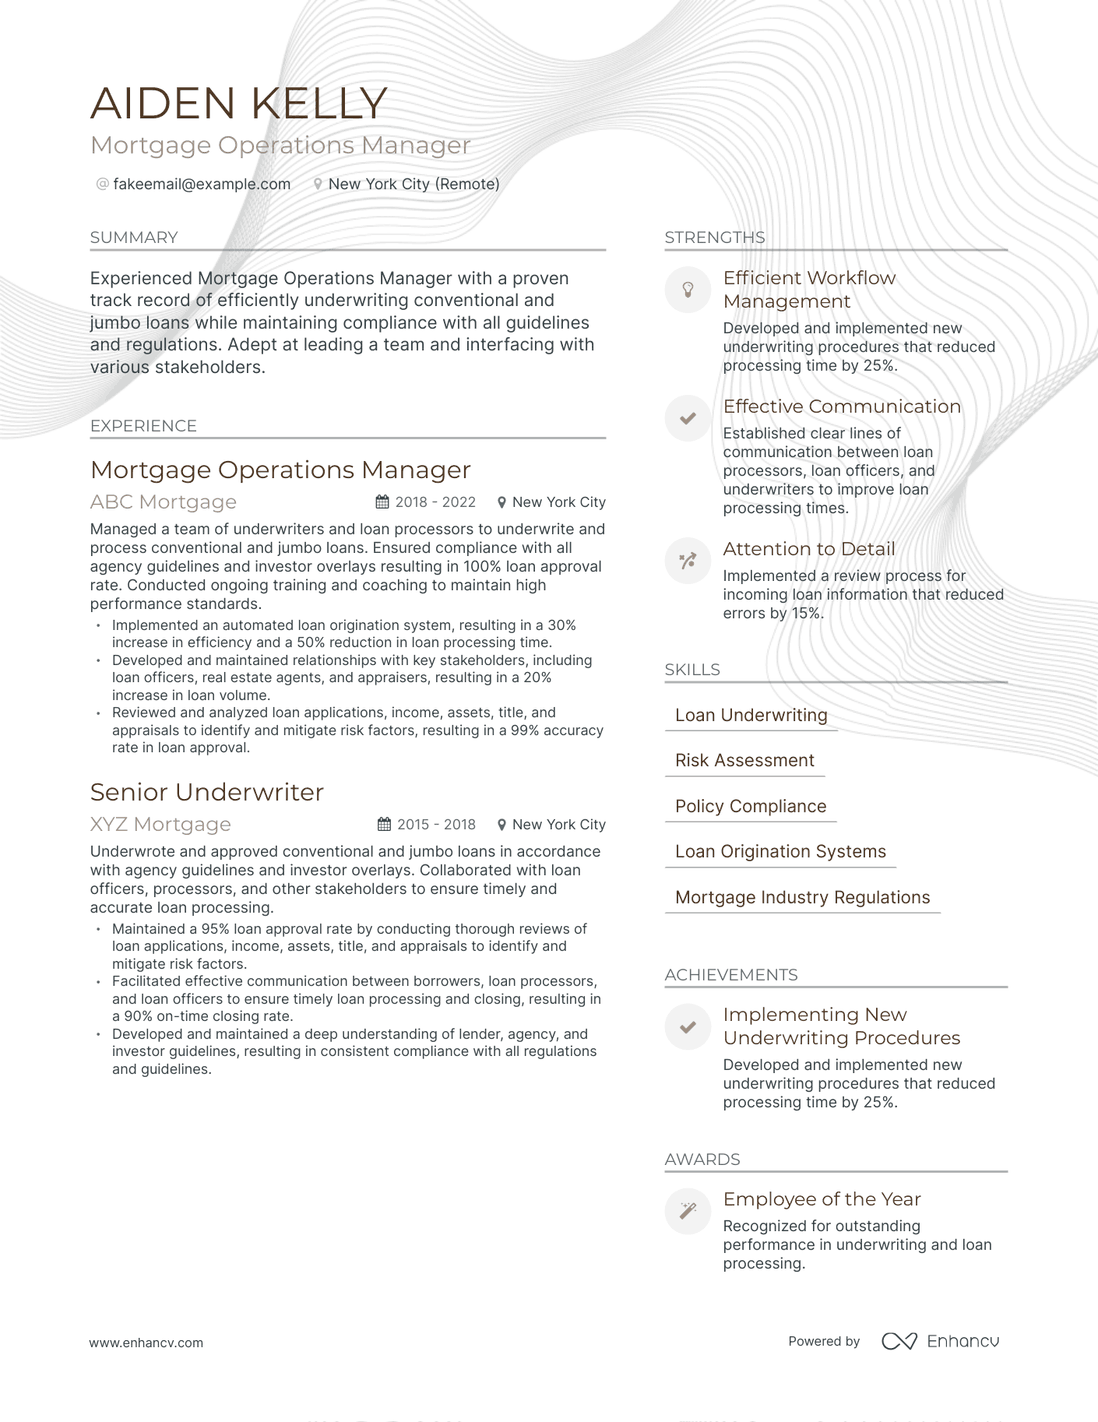 Modern Mortgage Operations Manager Resume Template